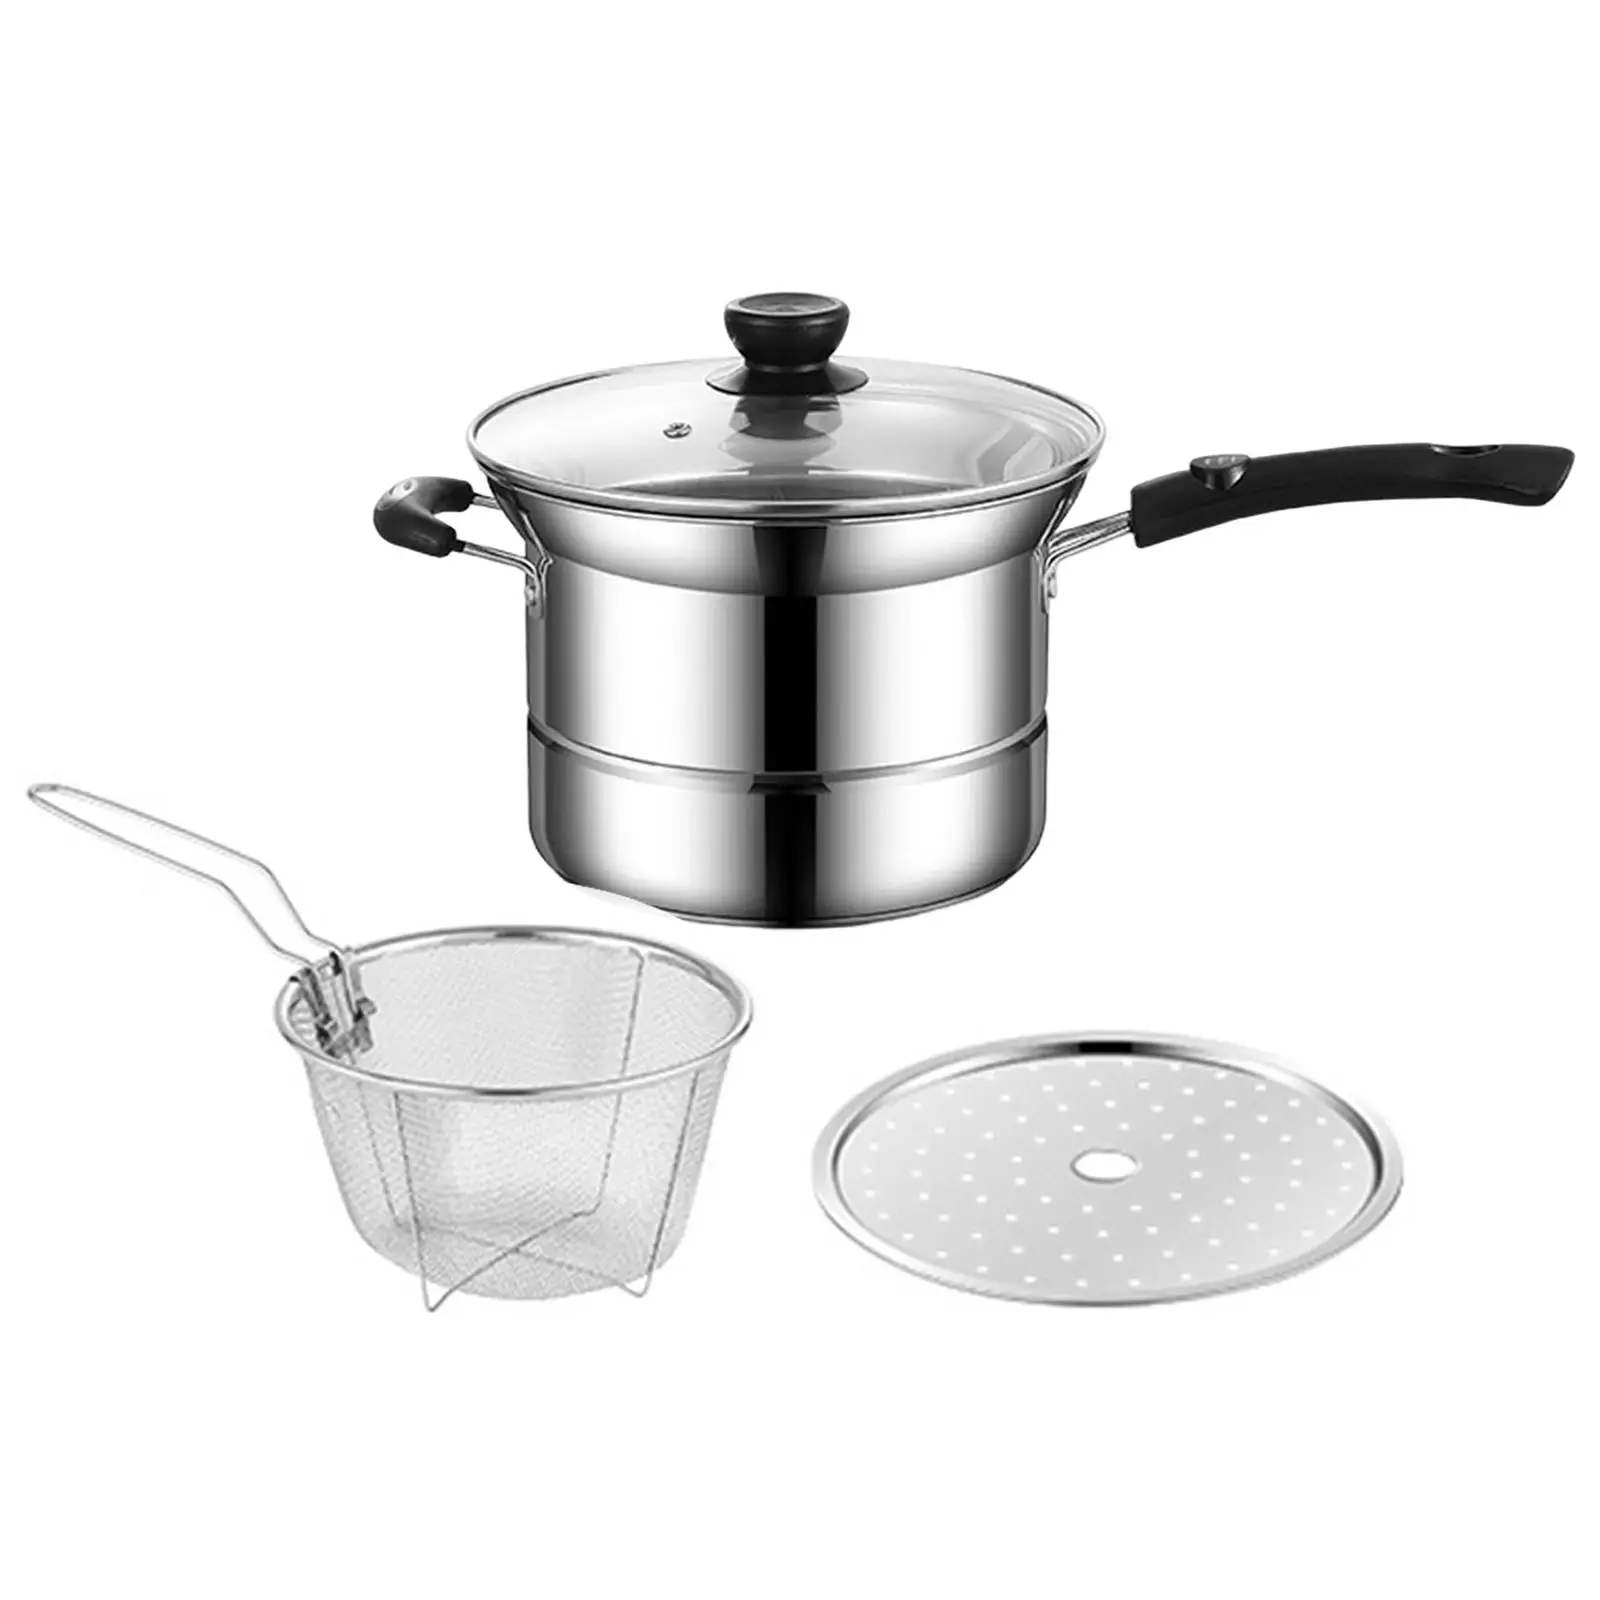 Saucepan Milk Pot Cooker Soup Pot Universal with Lid Handle Utensils Small Pot for Backpacking Dining Room Cooking Kitchen